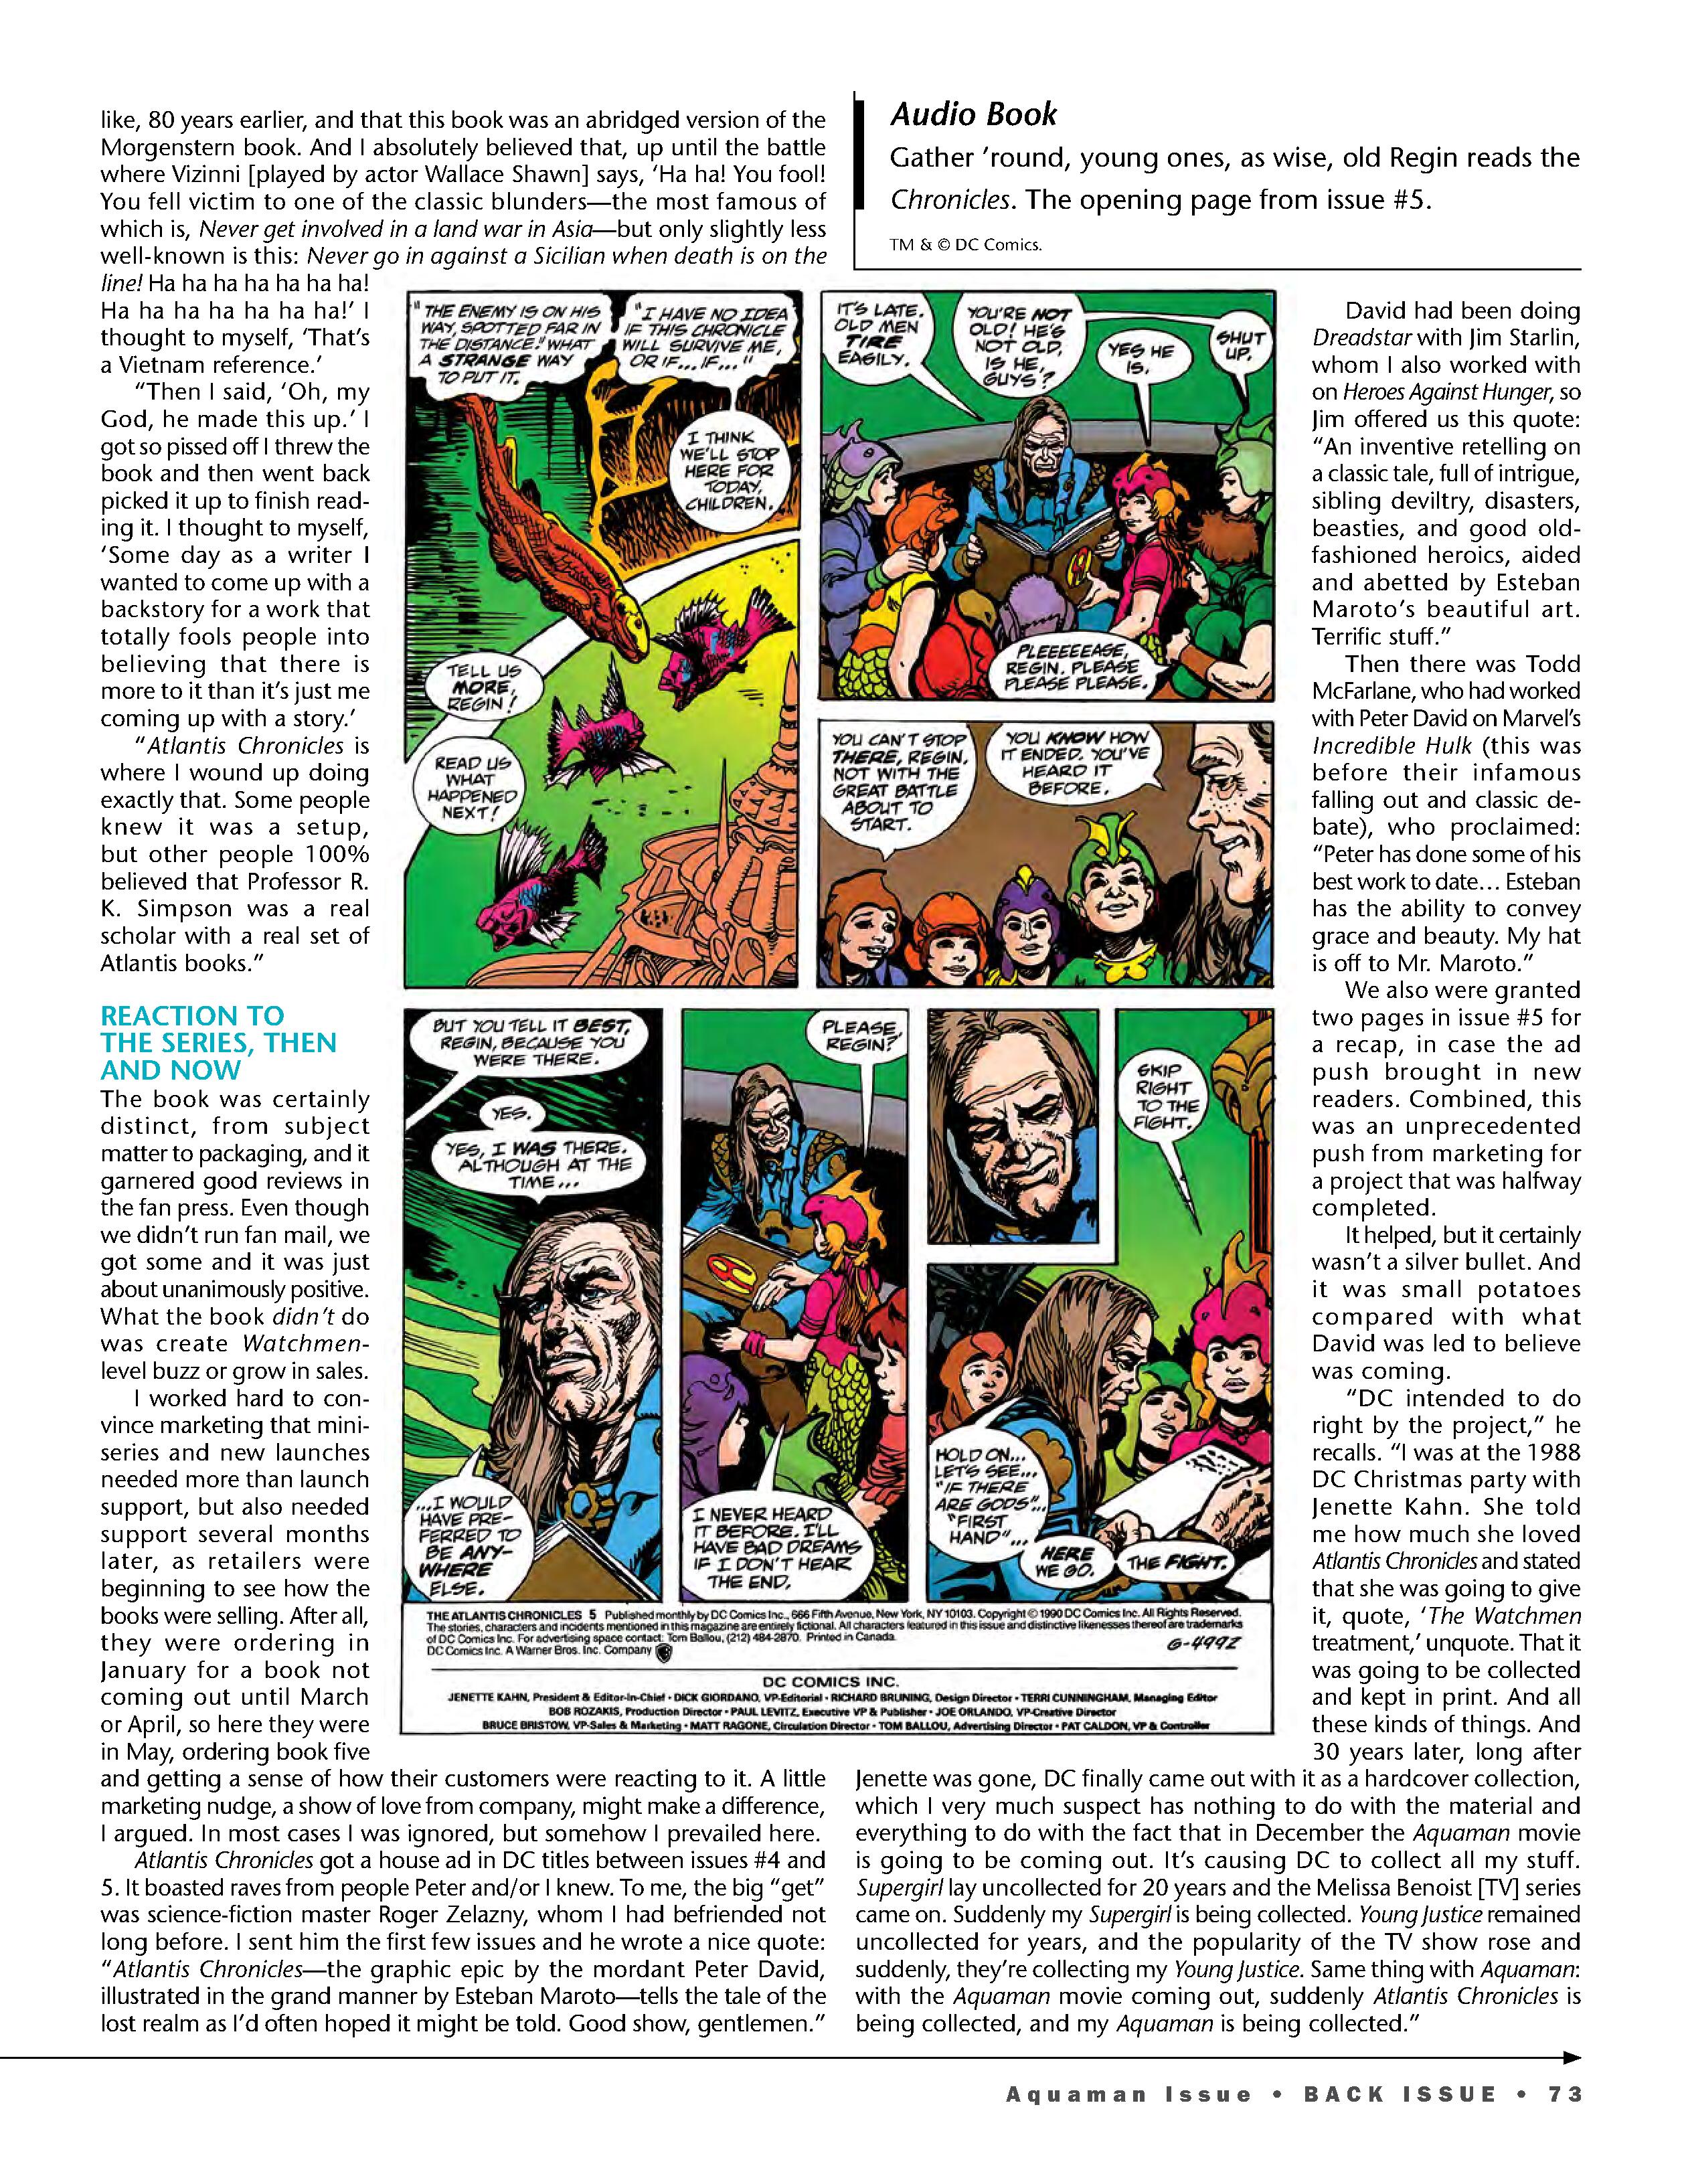 Read online Back Issue comic -  Issue #108 - 75